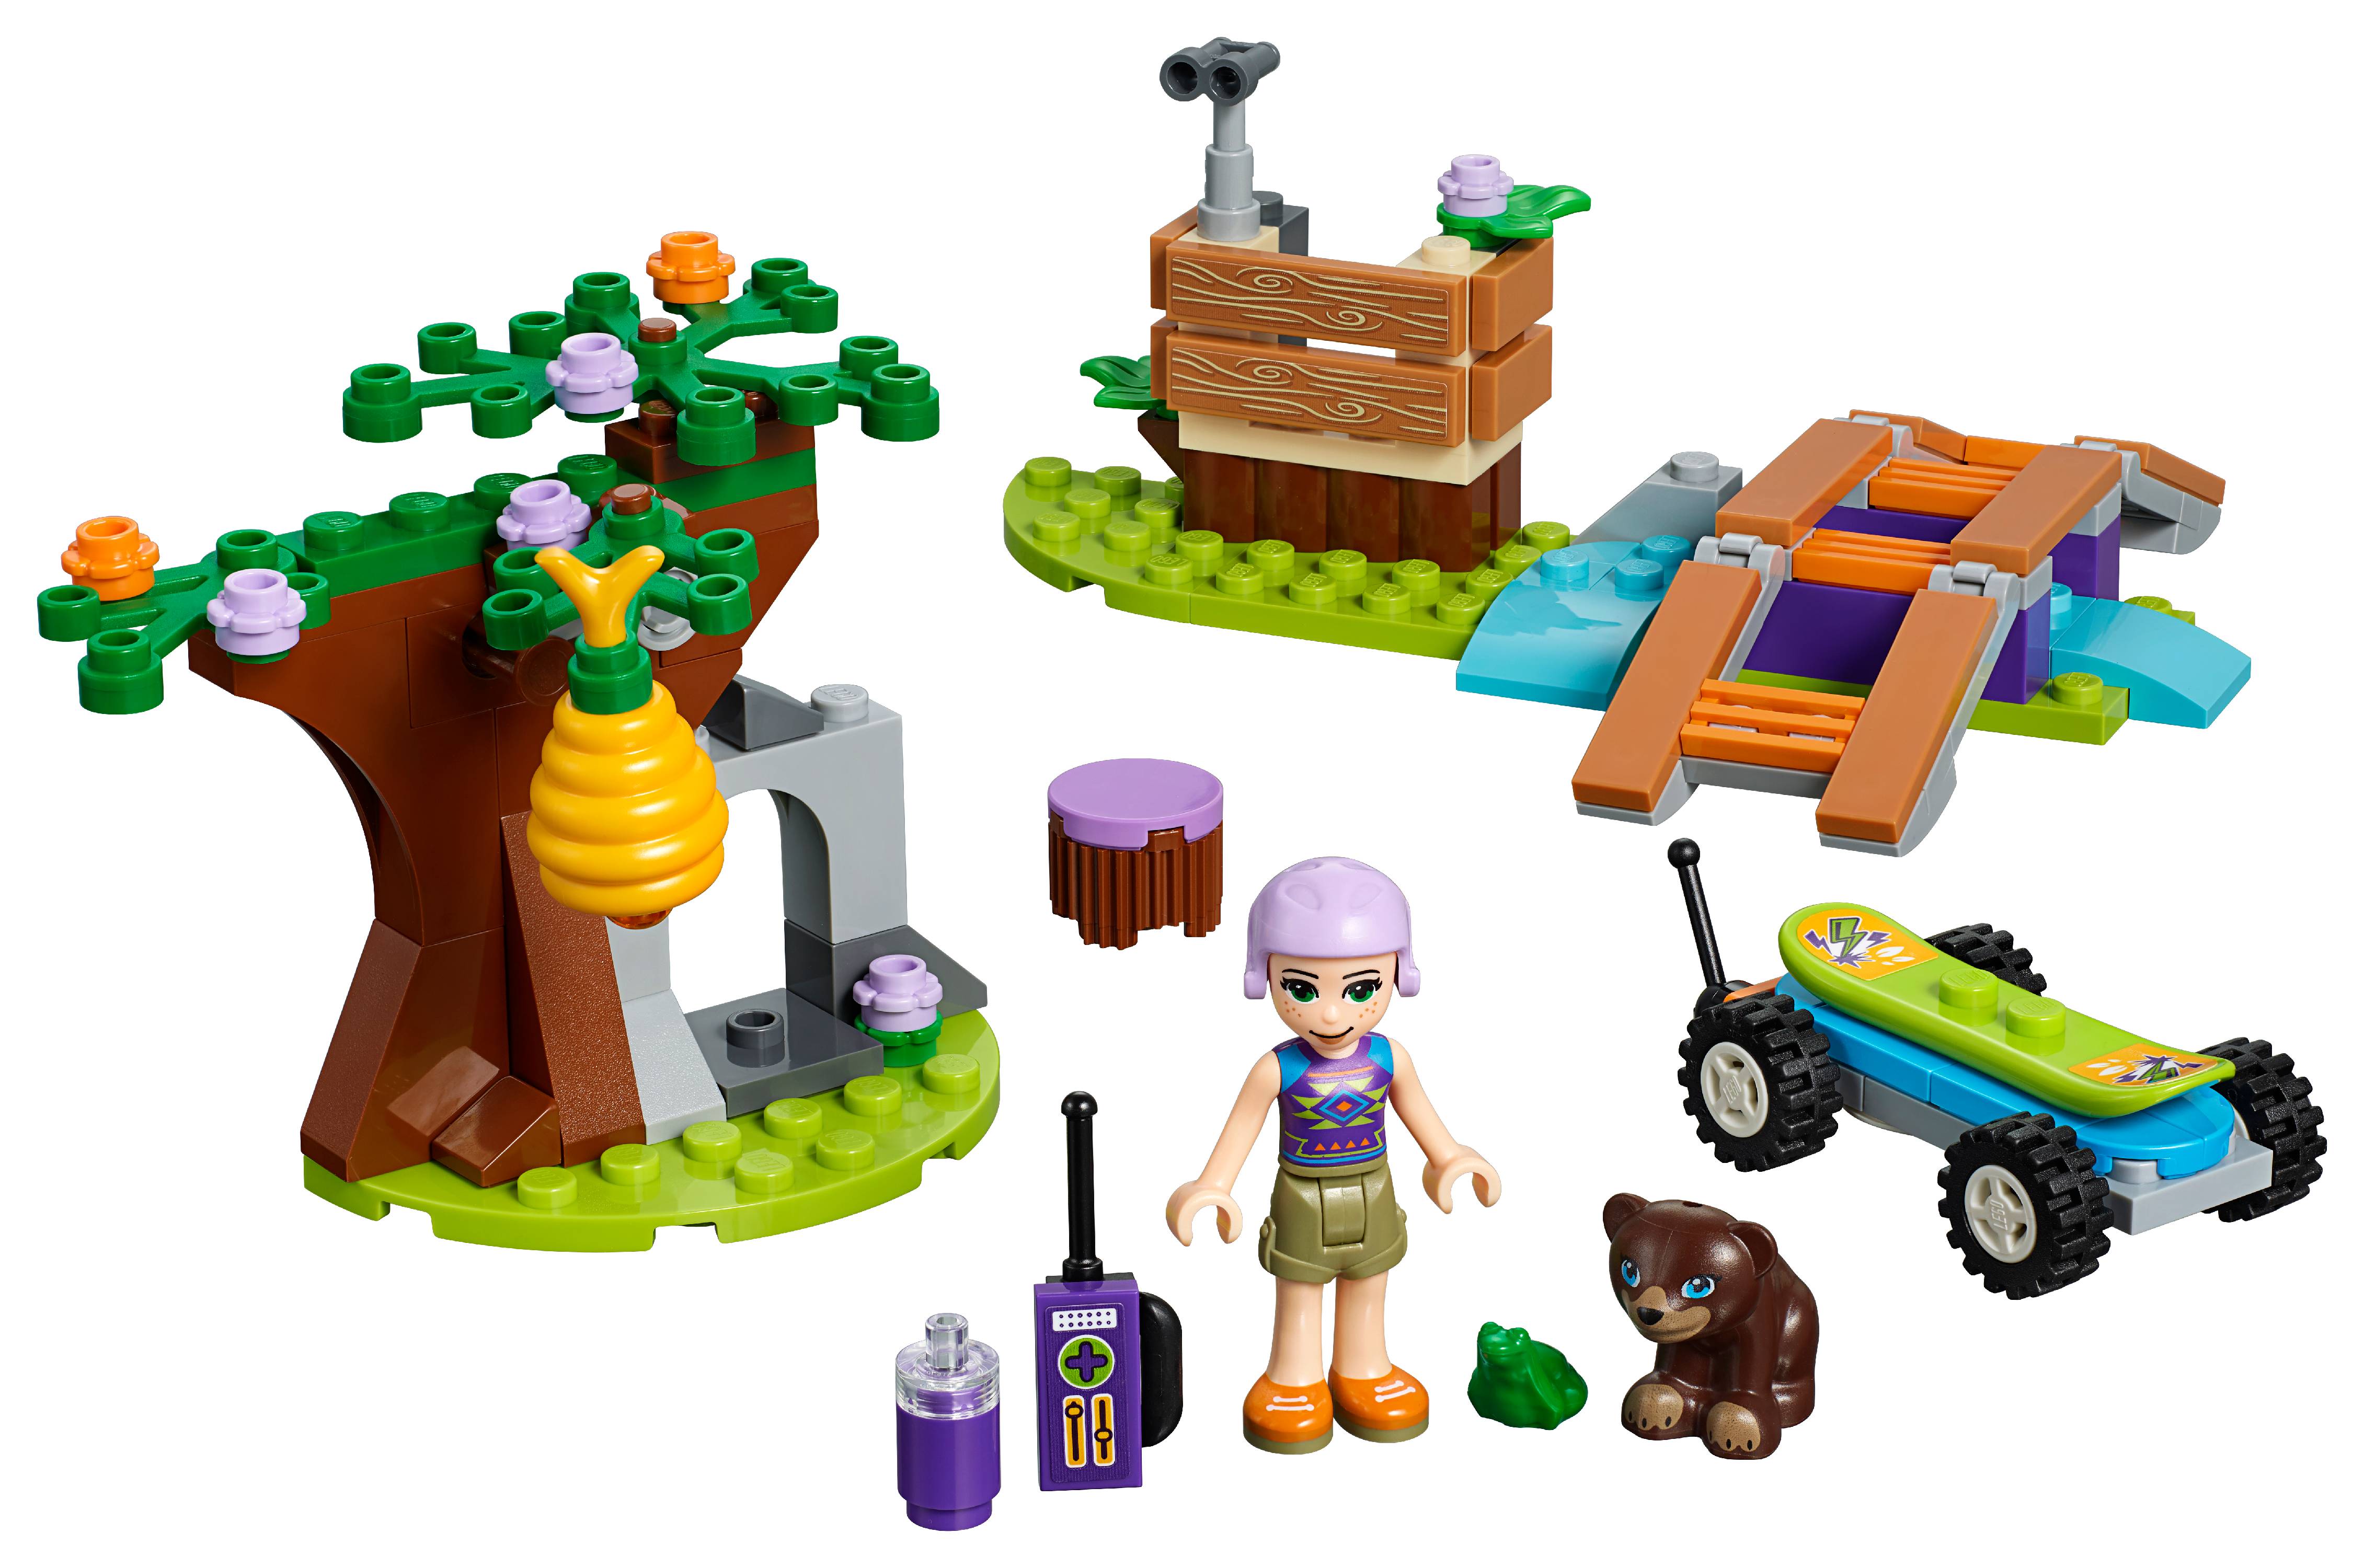 LEGO Friends Mia's Forest Adventure 41363 Building Set - image 3 of 8